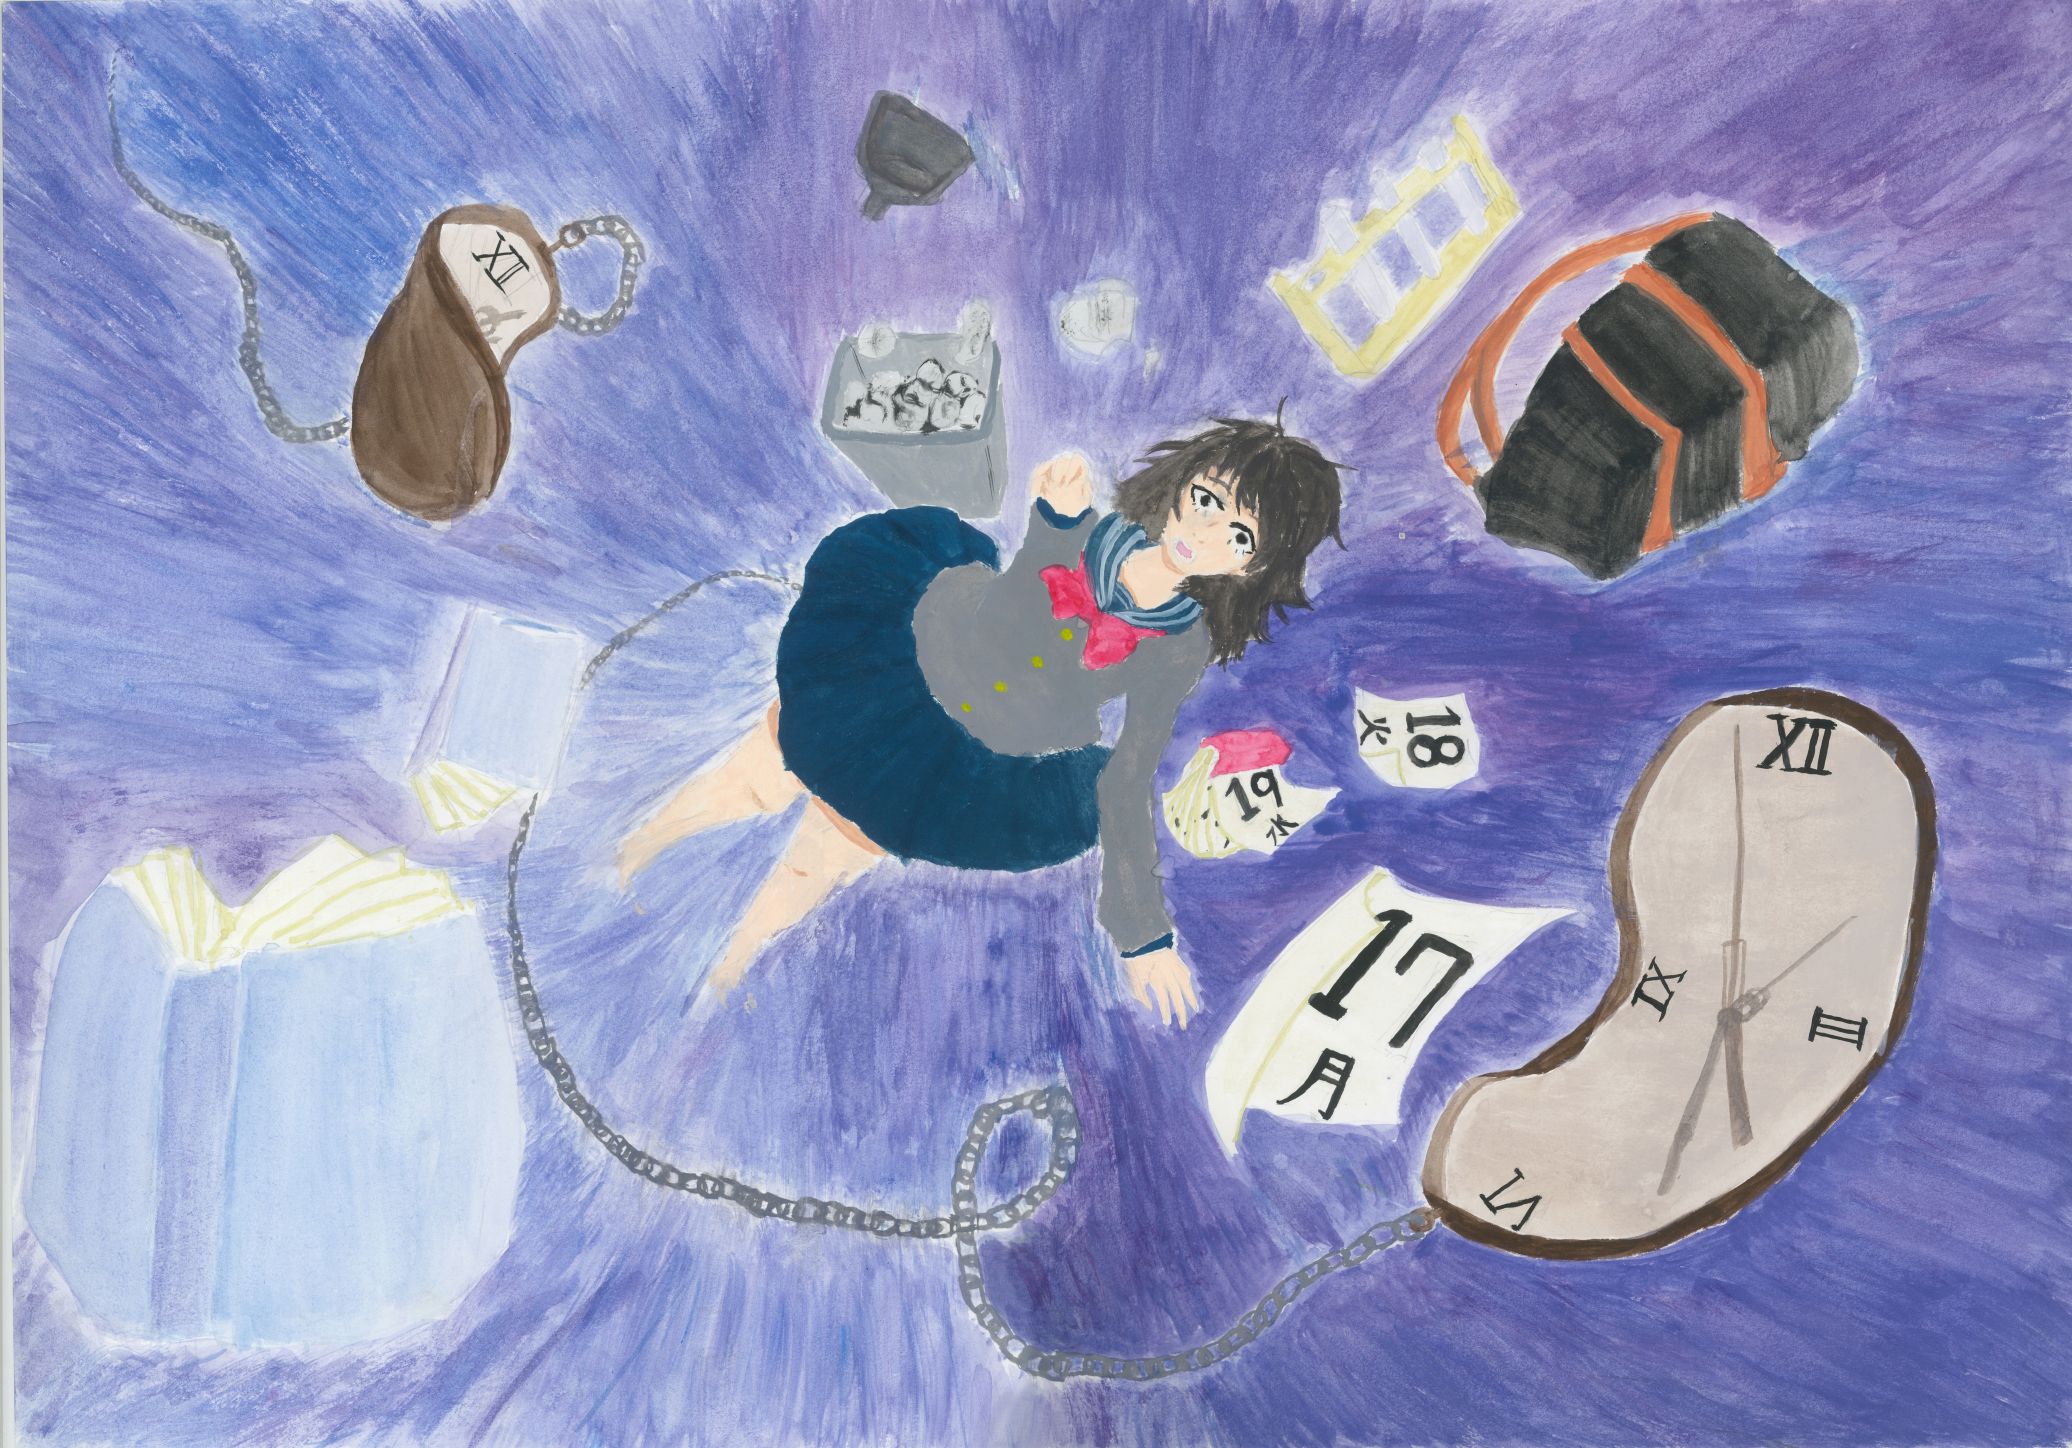 Student artwork – Entrance to the past